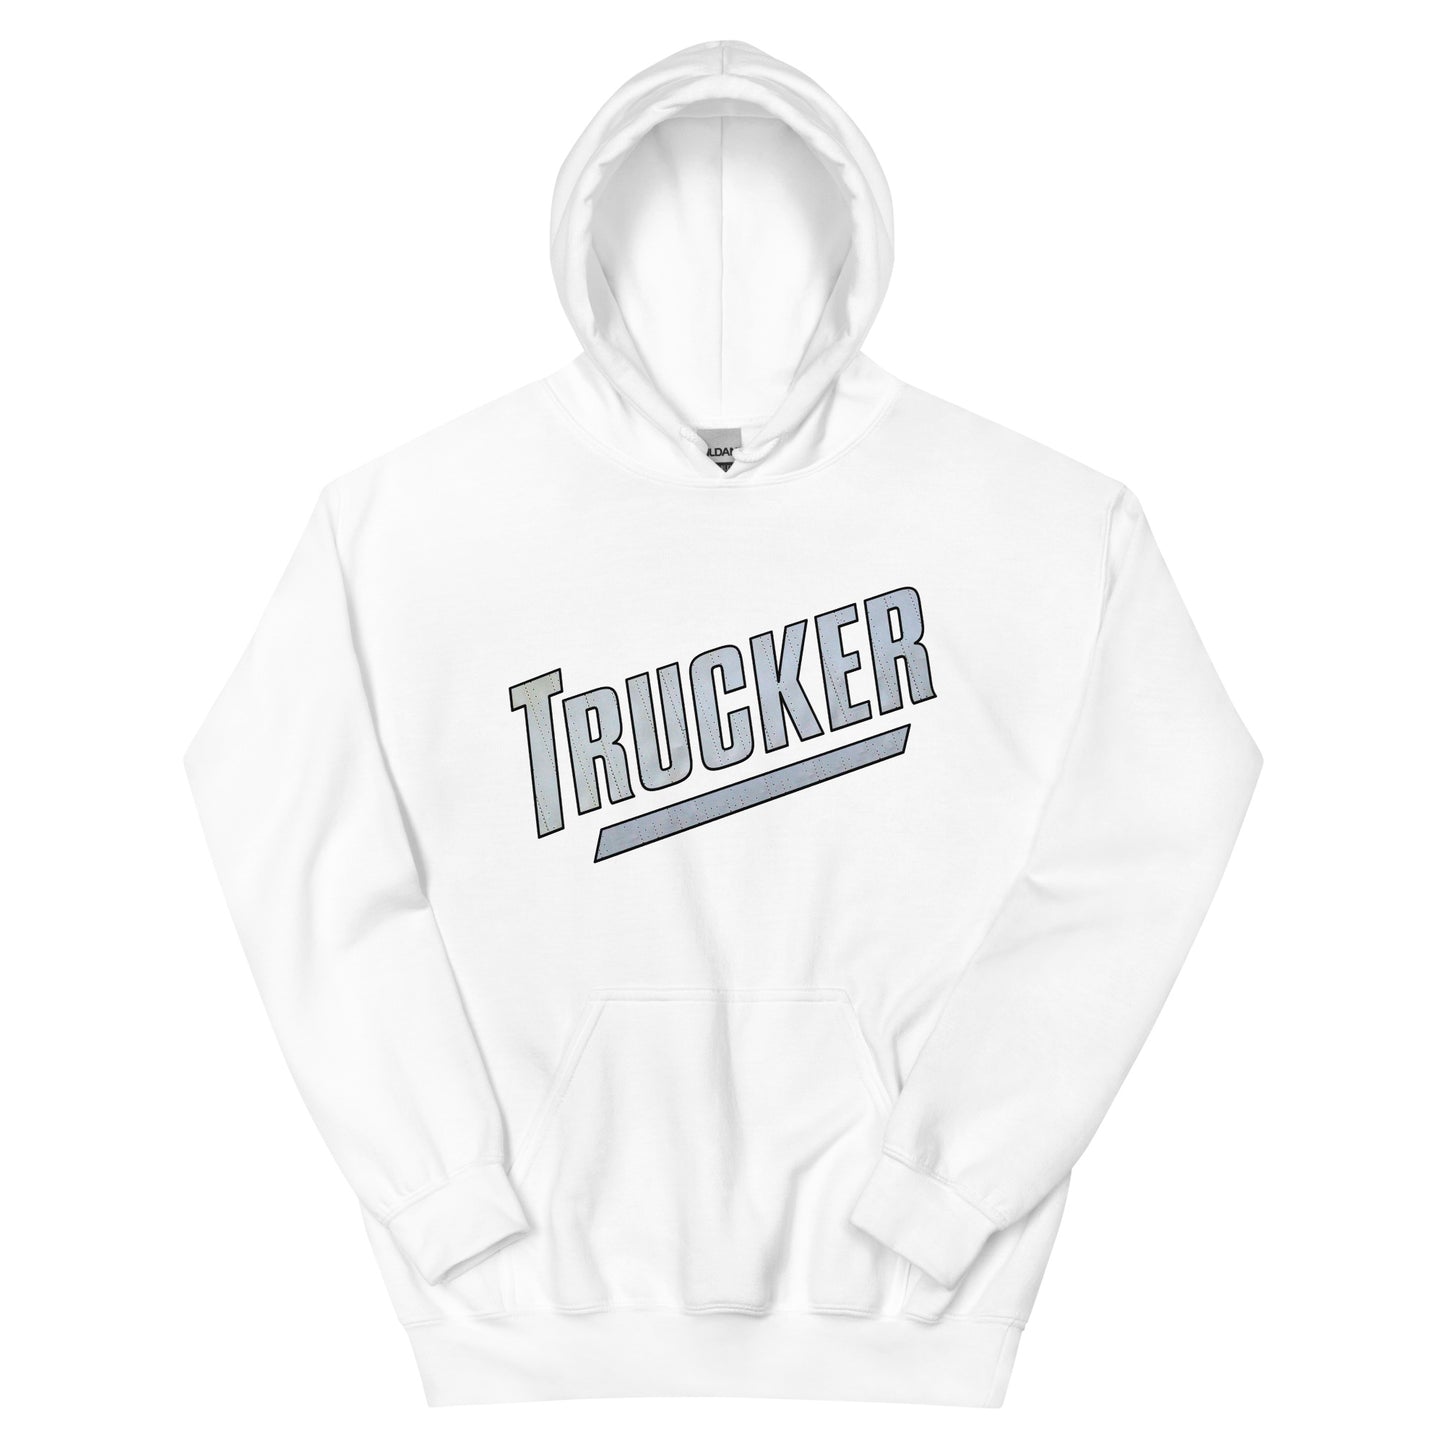 Trucker Hoodie - Image of a white hoodie with the word Trucker written with a design, perfect for truckers looking for style and comfort.